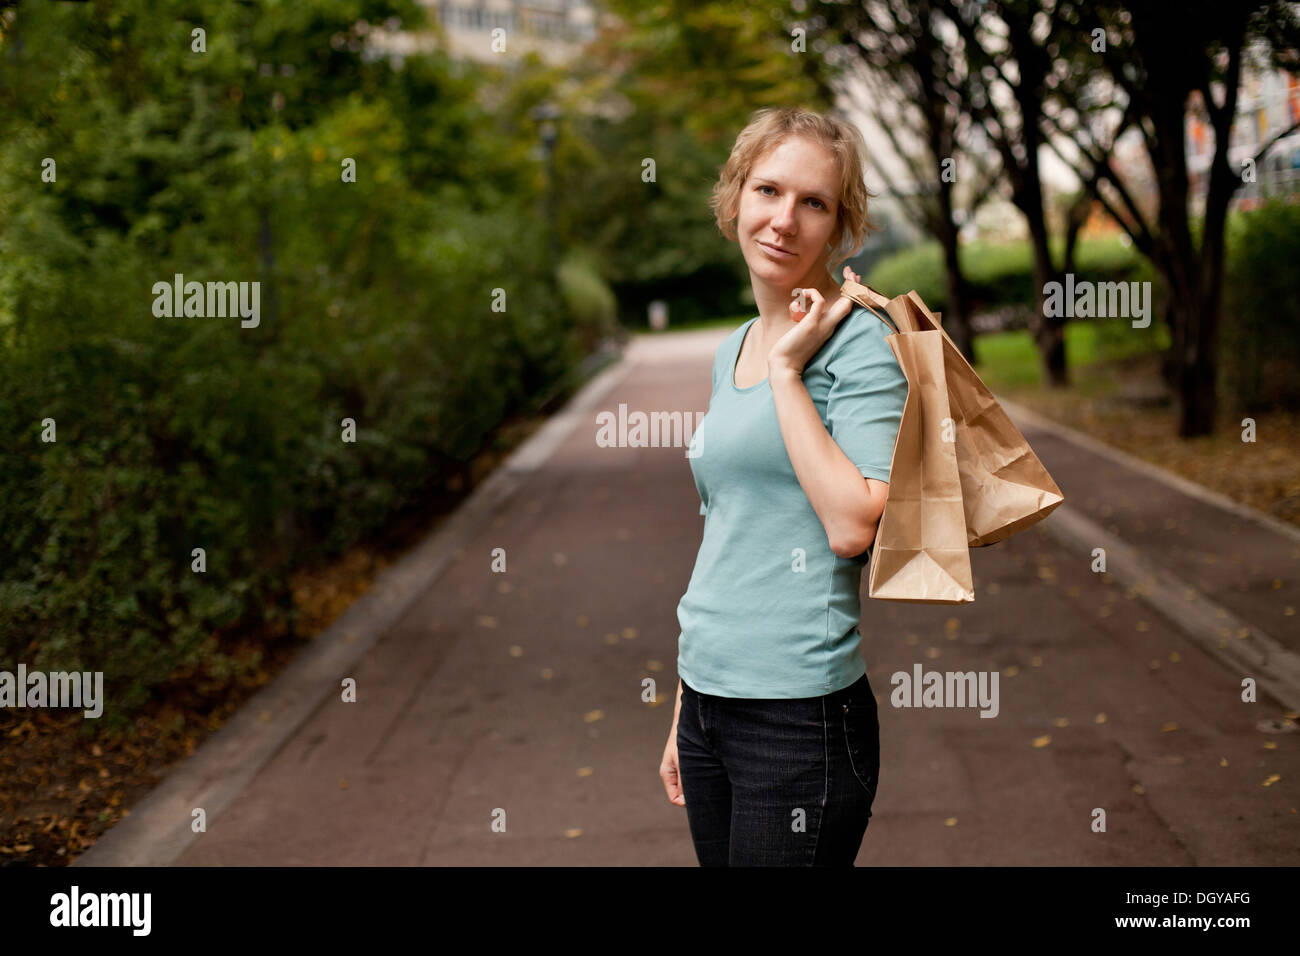 young smiling woman holding shopping bags Stock Photo